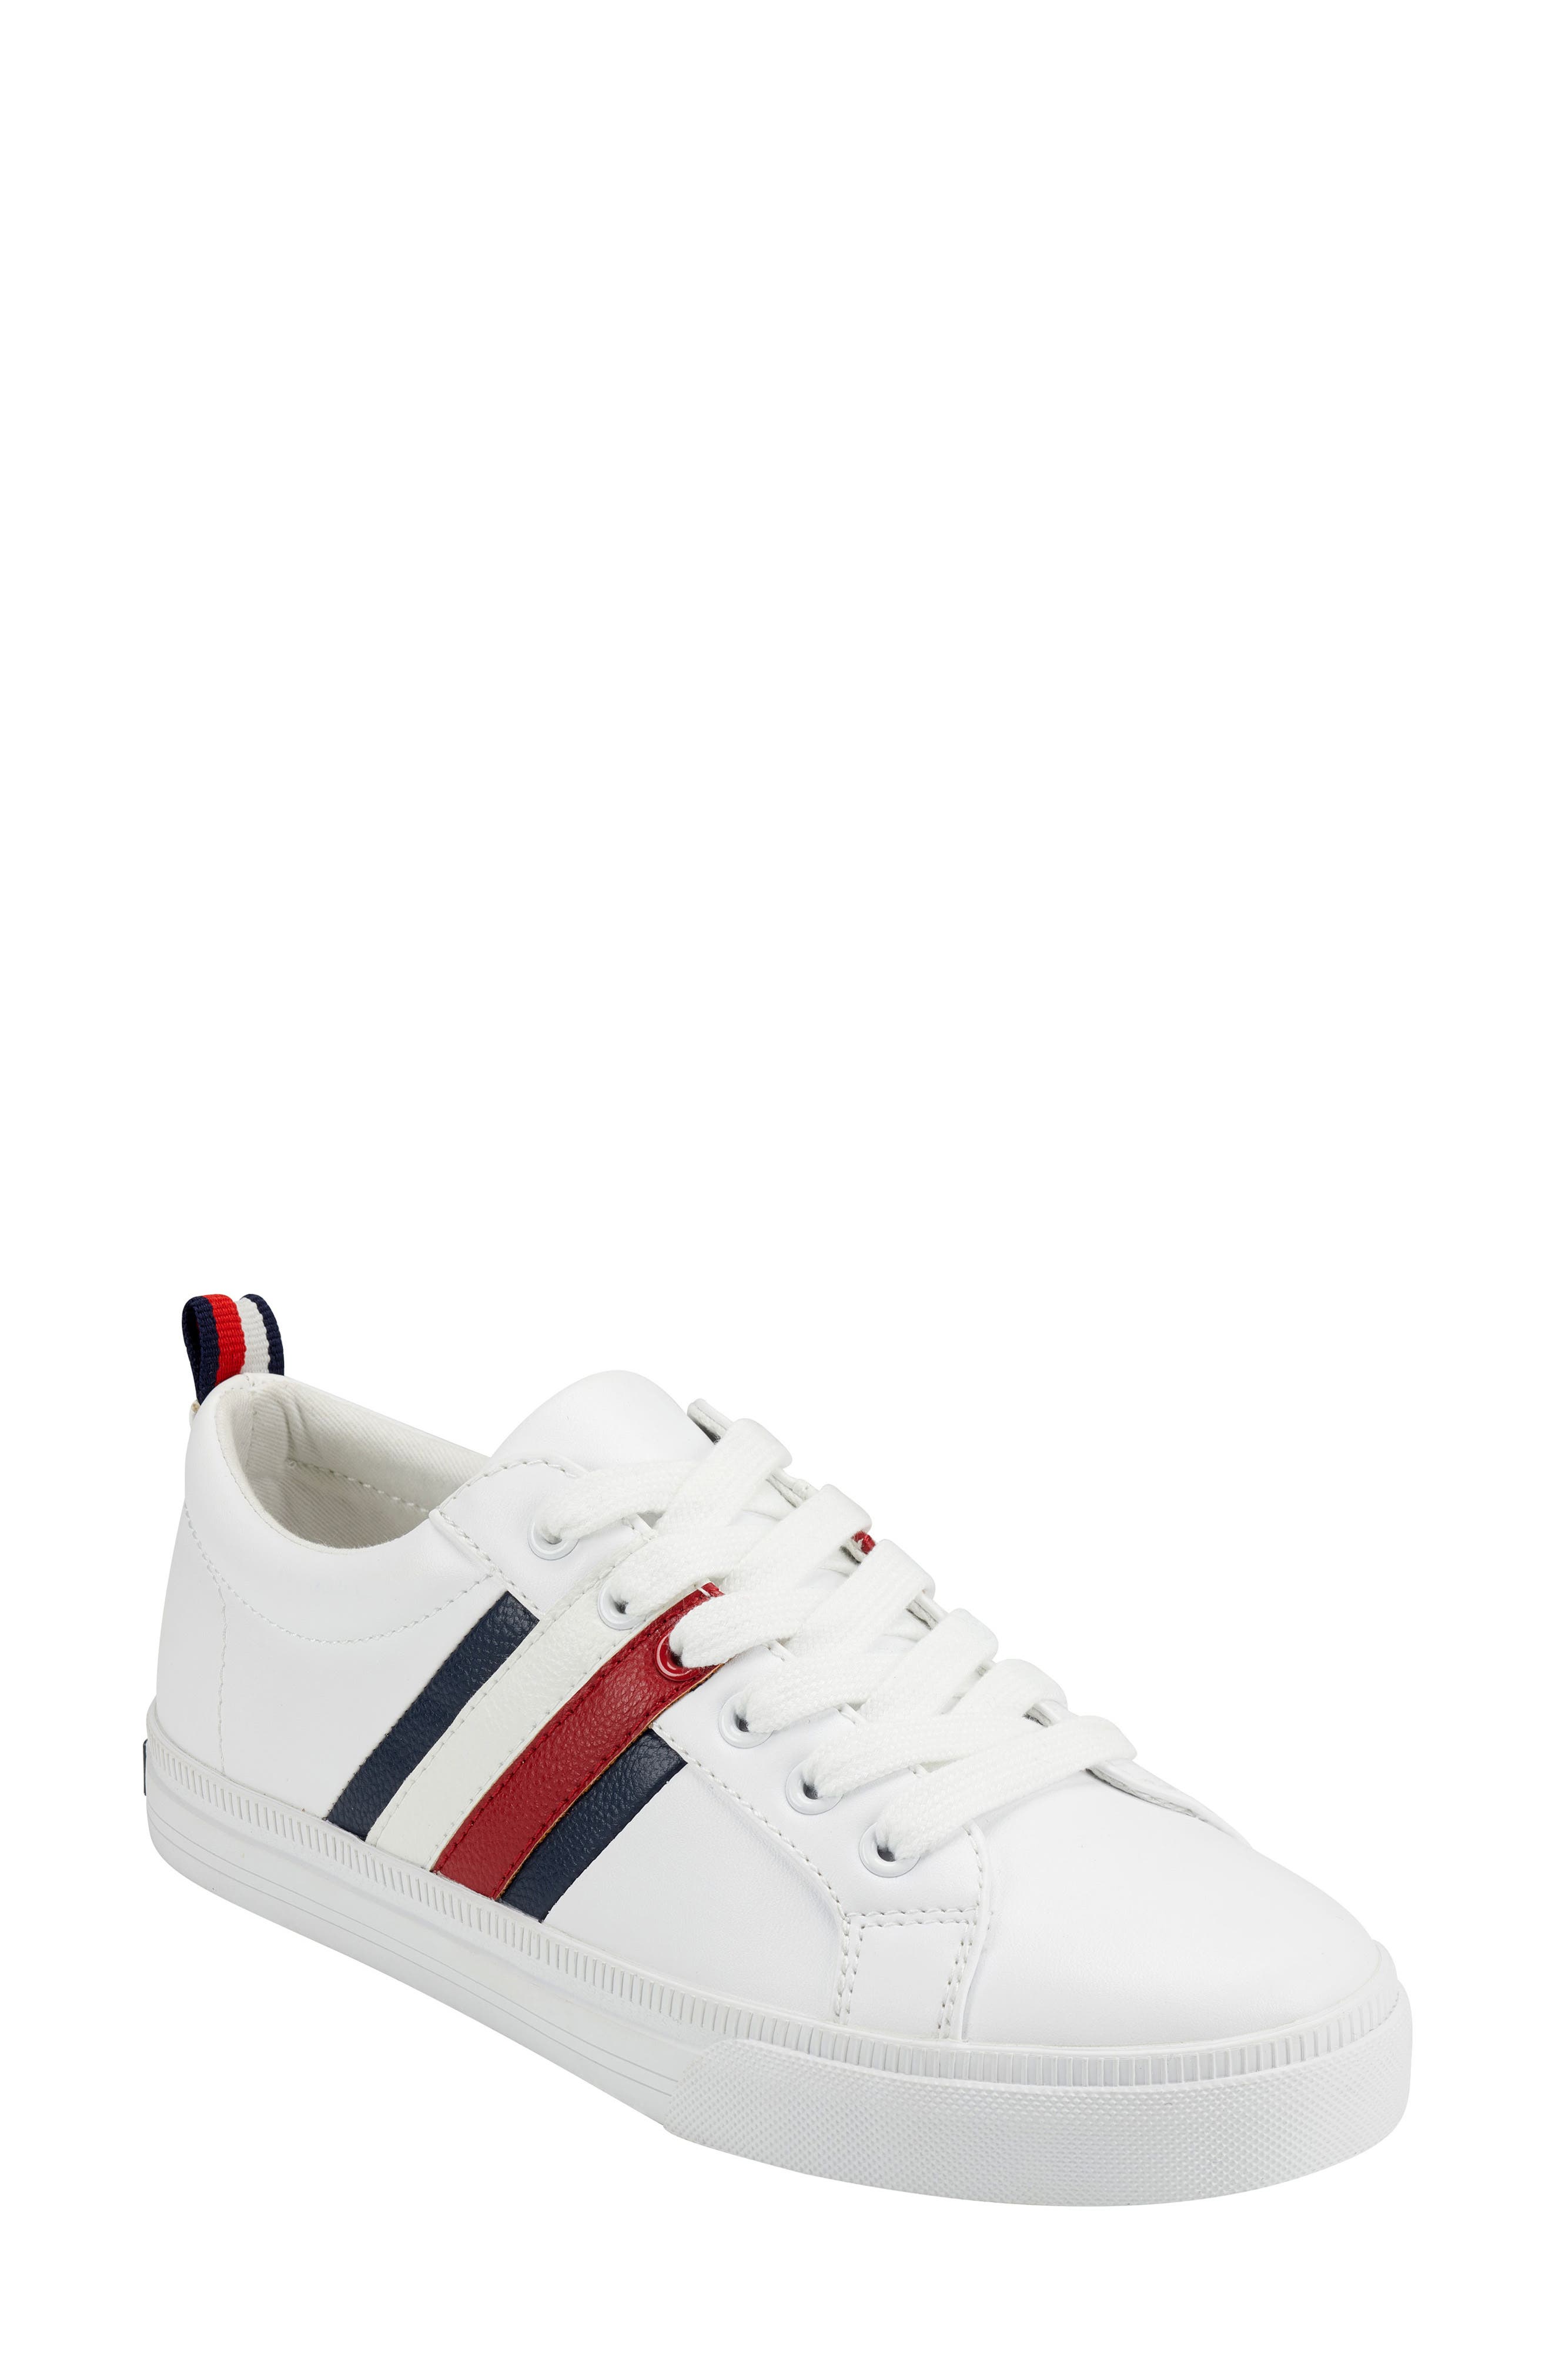 ross tommy hilfiger shoes